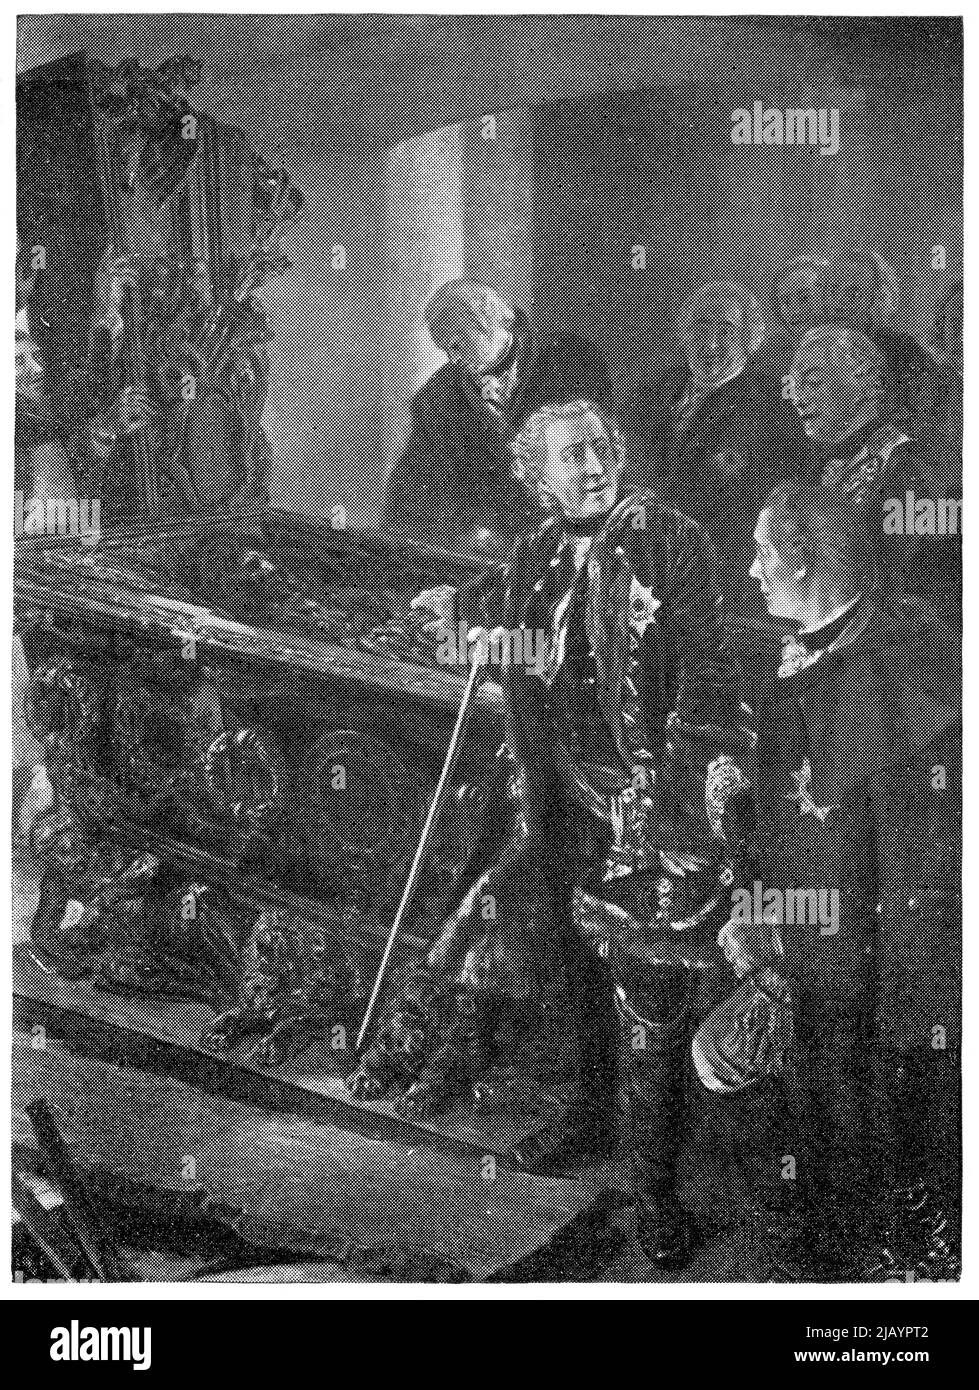 Frederick the Great at the coffin of the Great Elector by a German realist painter Adolph von Menzel. Publication of the book 'Meyers Konversations-Lexikon', Volume 2, Leipzig, Germany, 1910 Stock Photo